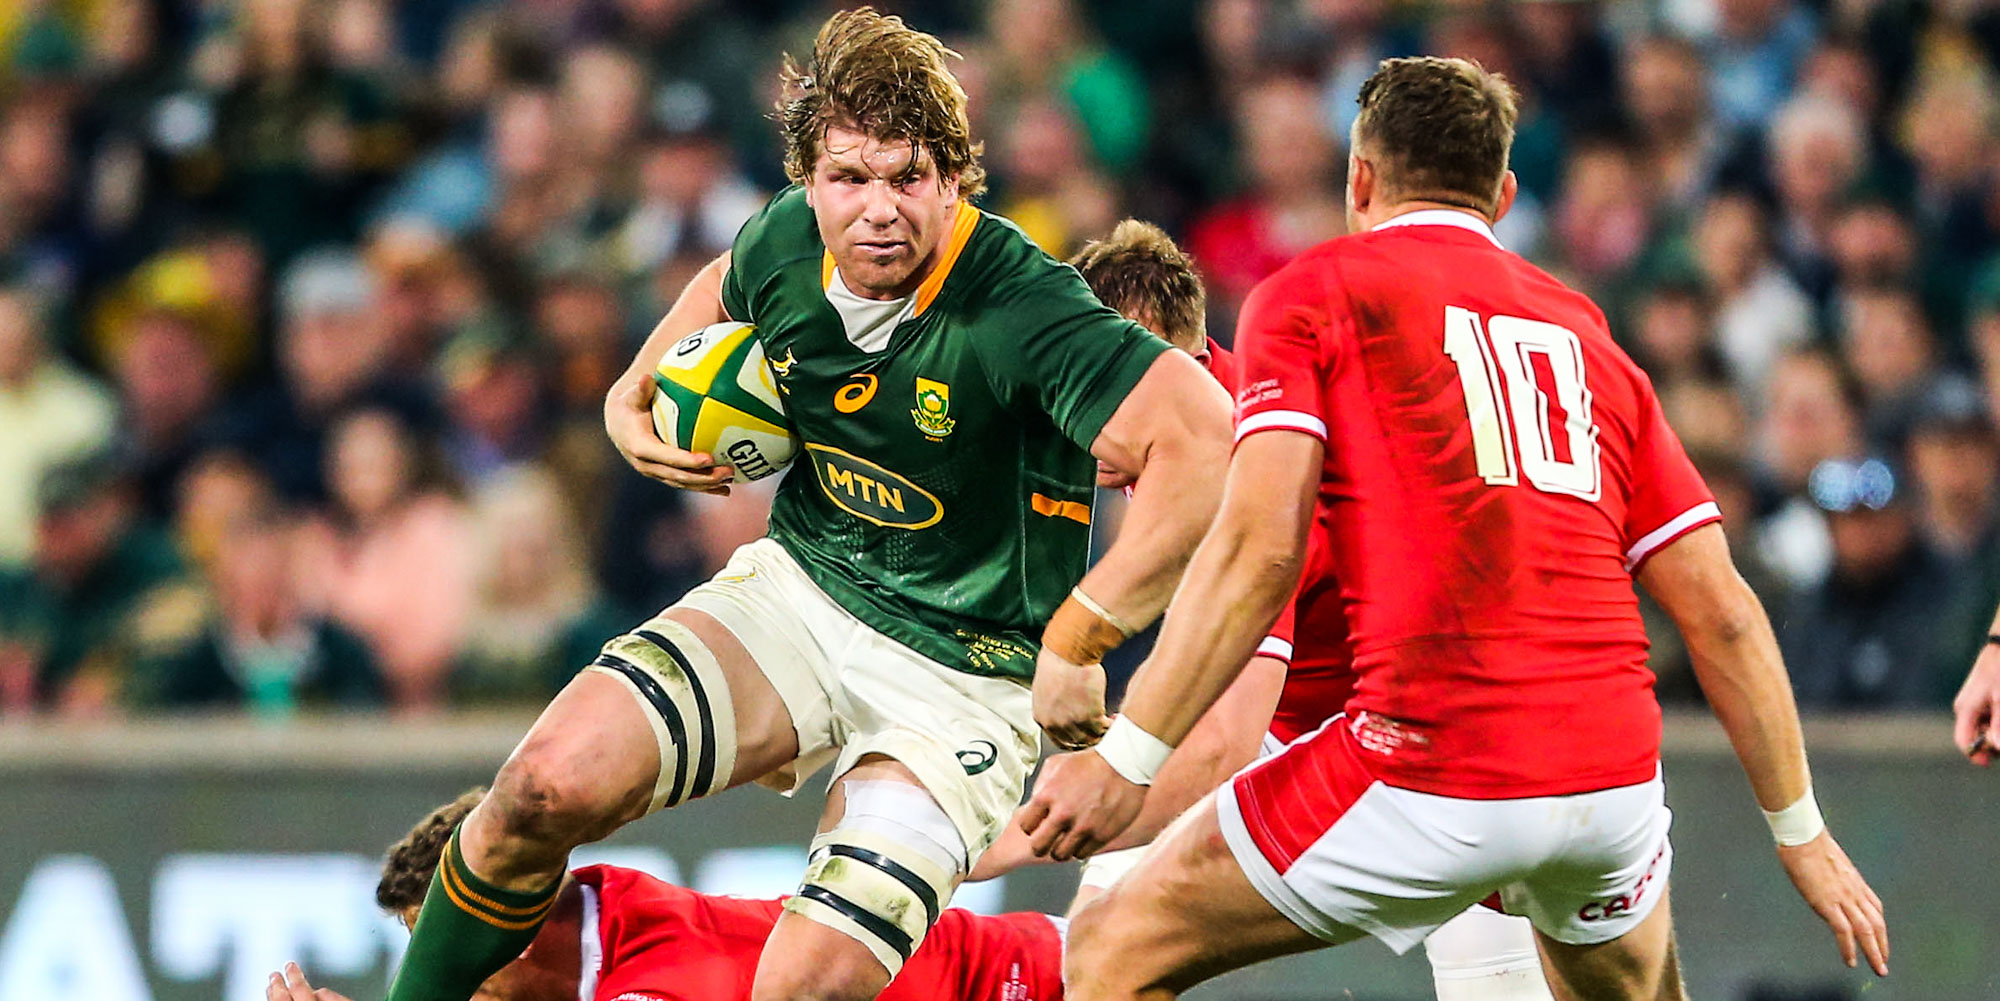 Evan Roos will earn his first Test start at Twickenham on Saturday.